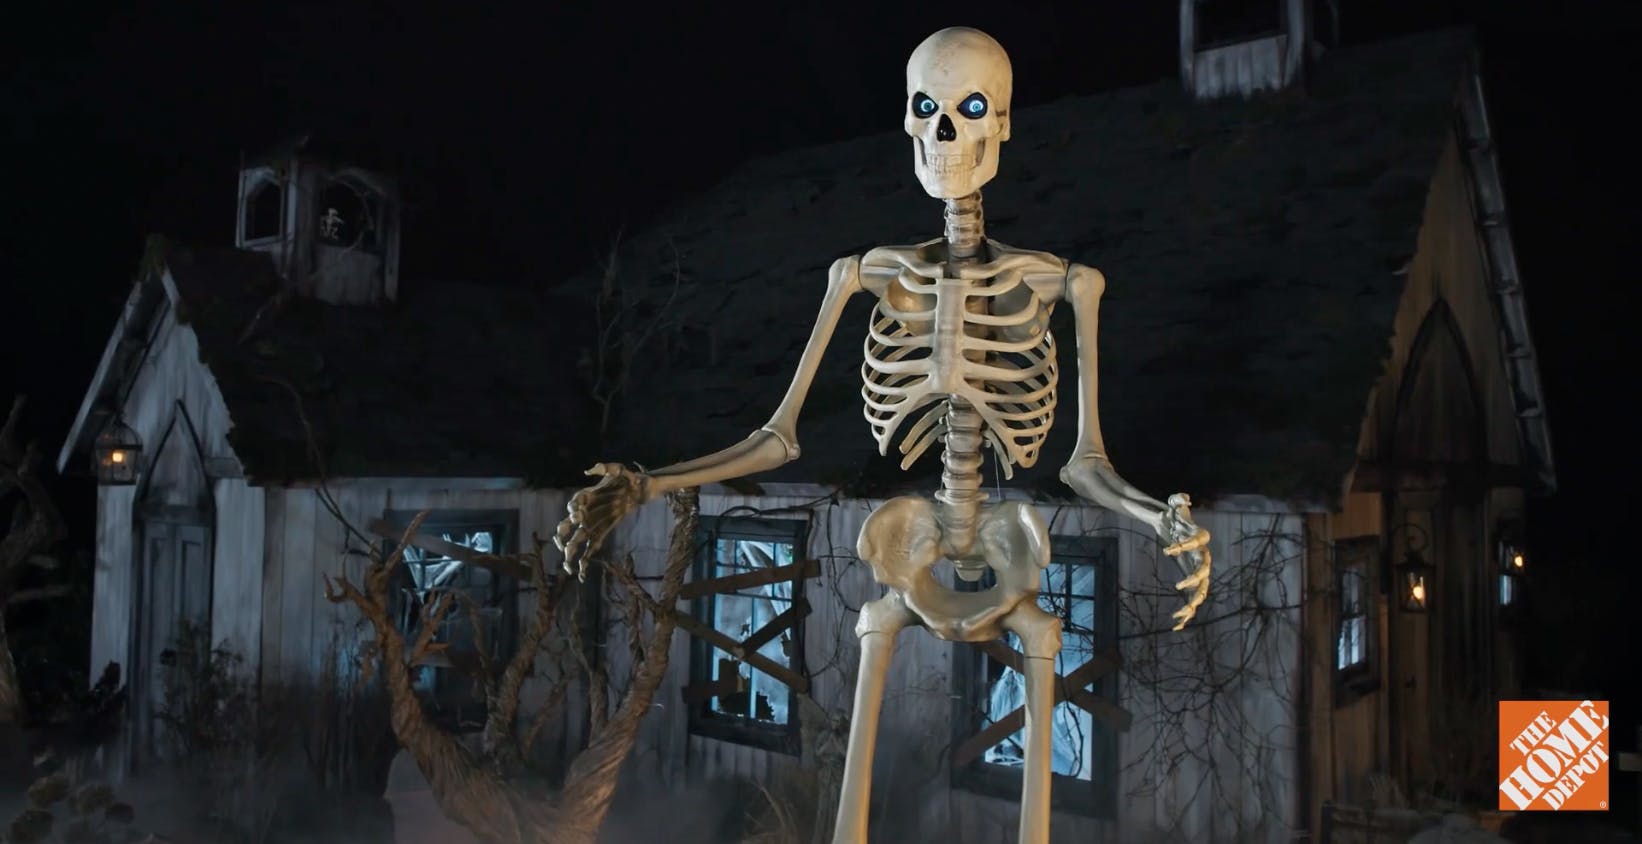 Hoping to Buy Skelly, the Home Depot Skeleton This Year? Here's How to Find One